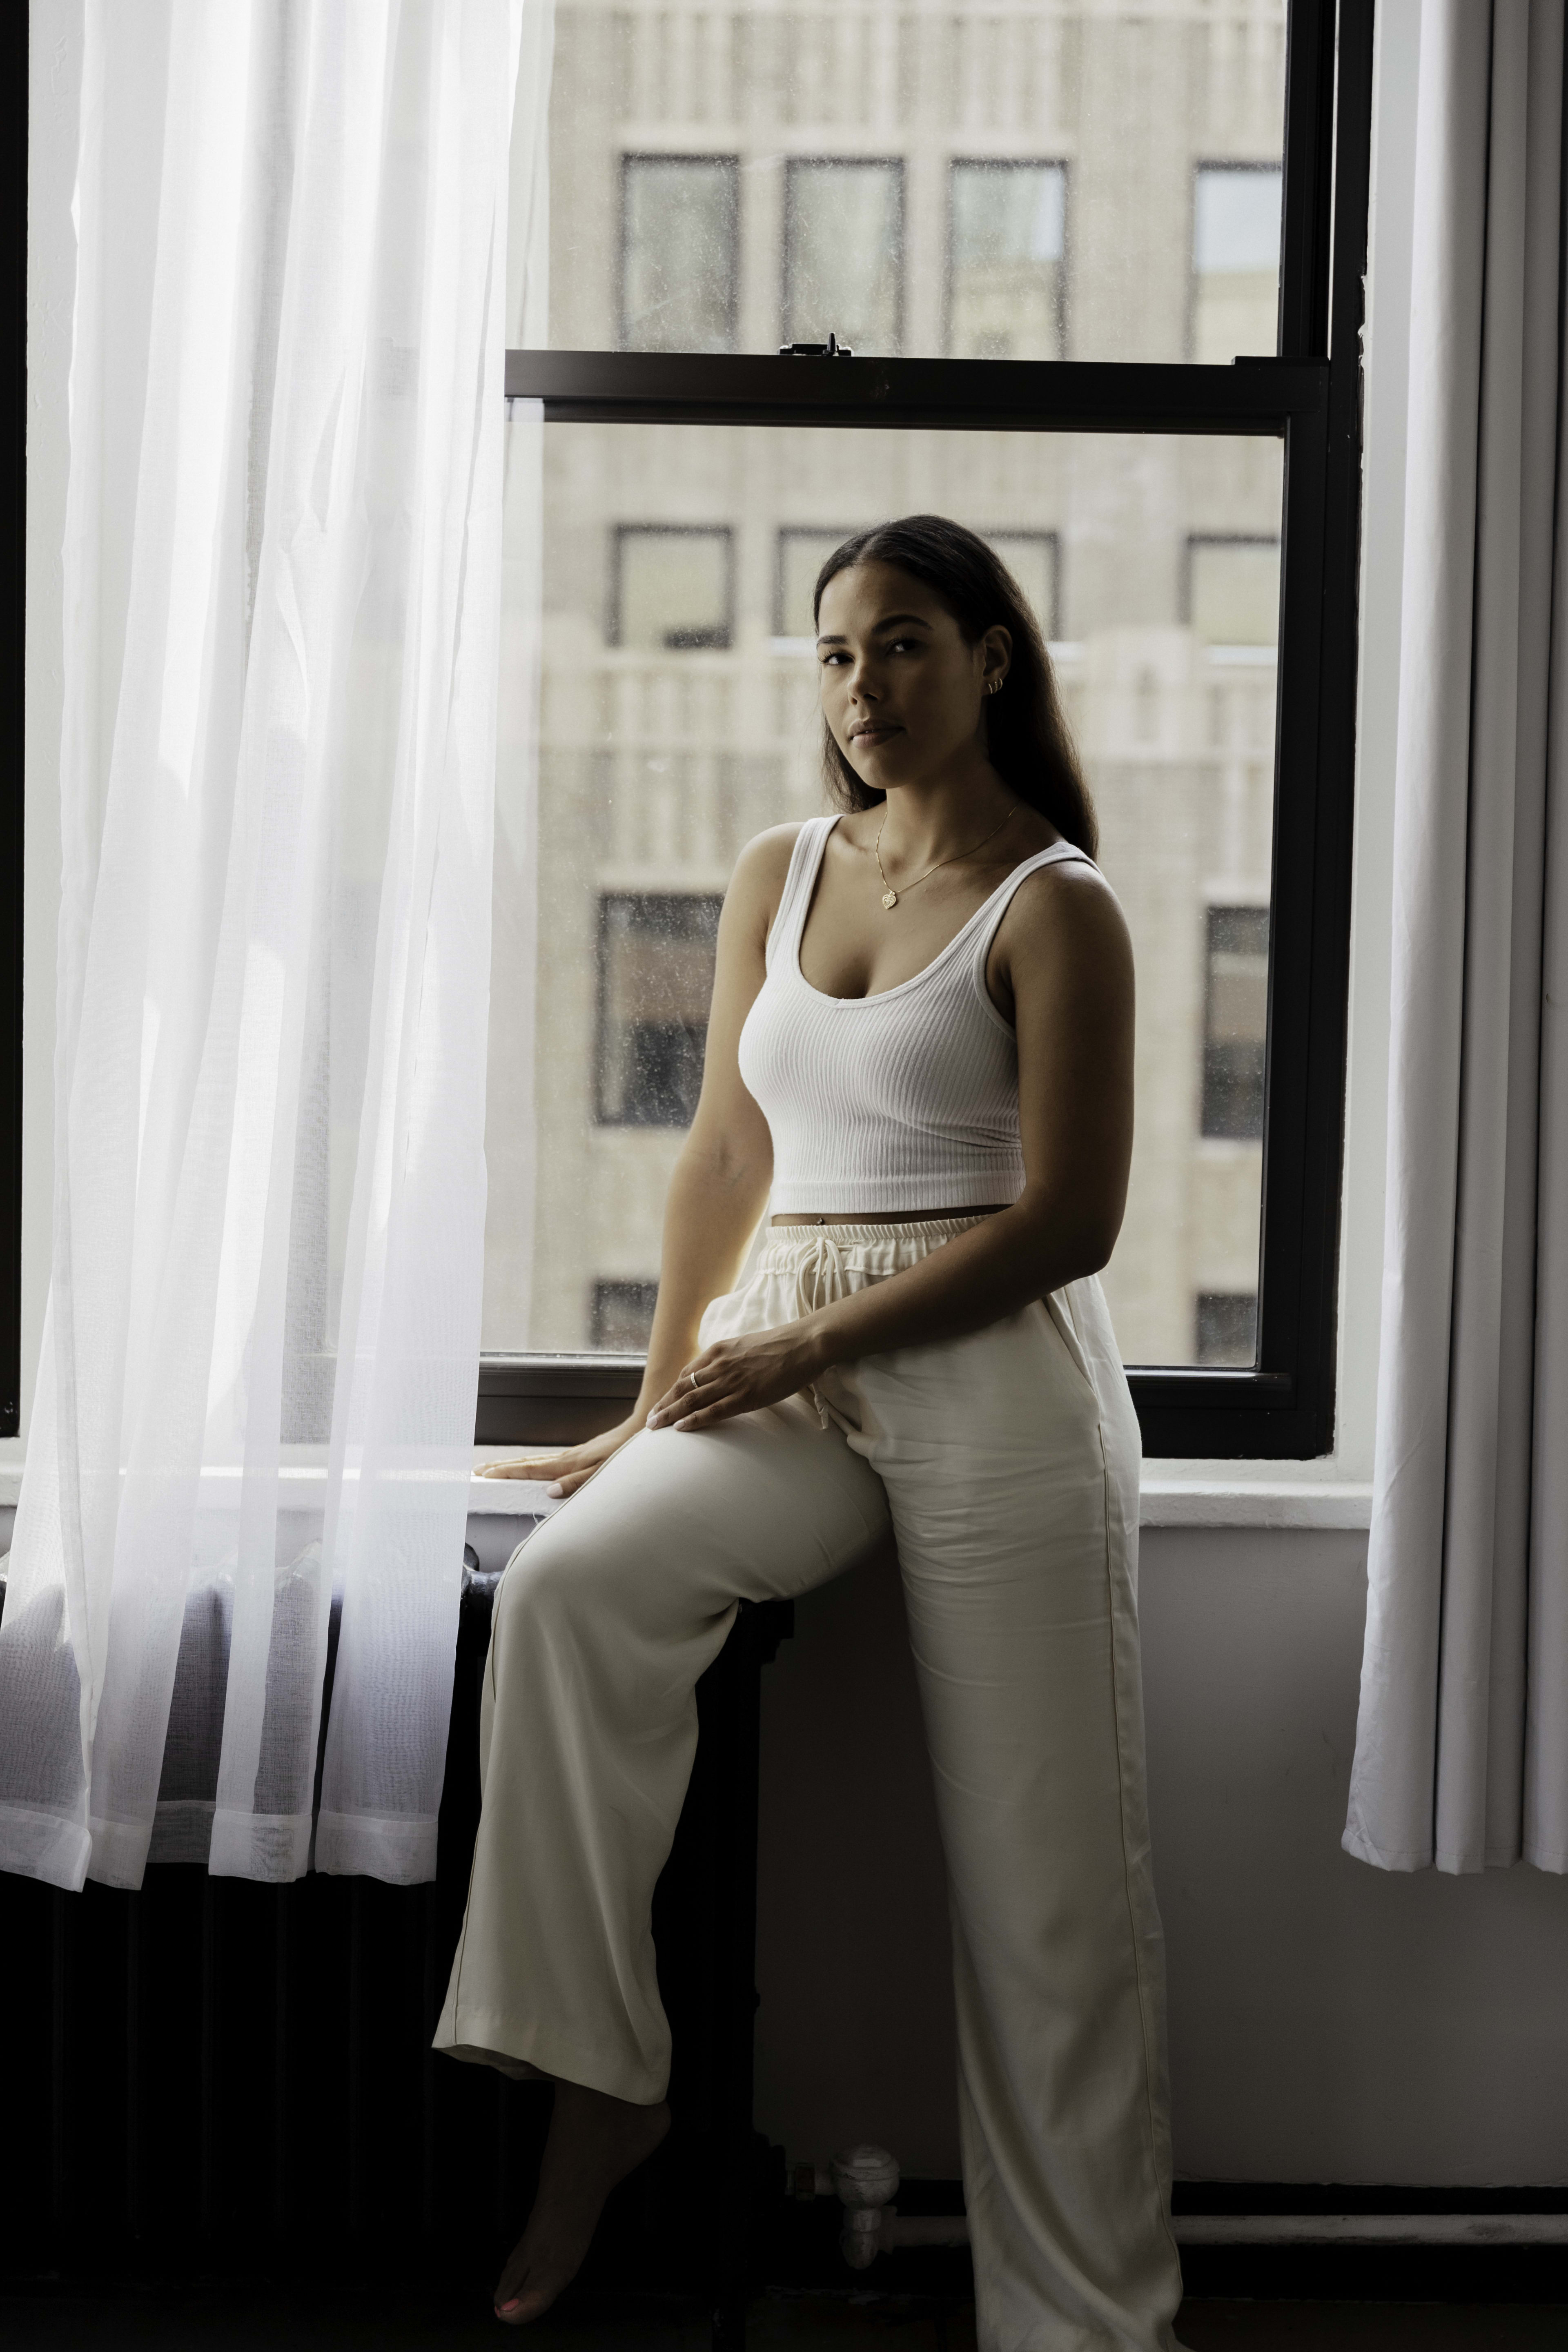 A fashion photoshoot featuring a woman on a minimal white window sill.